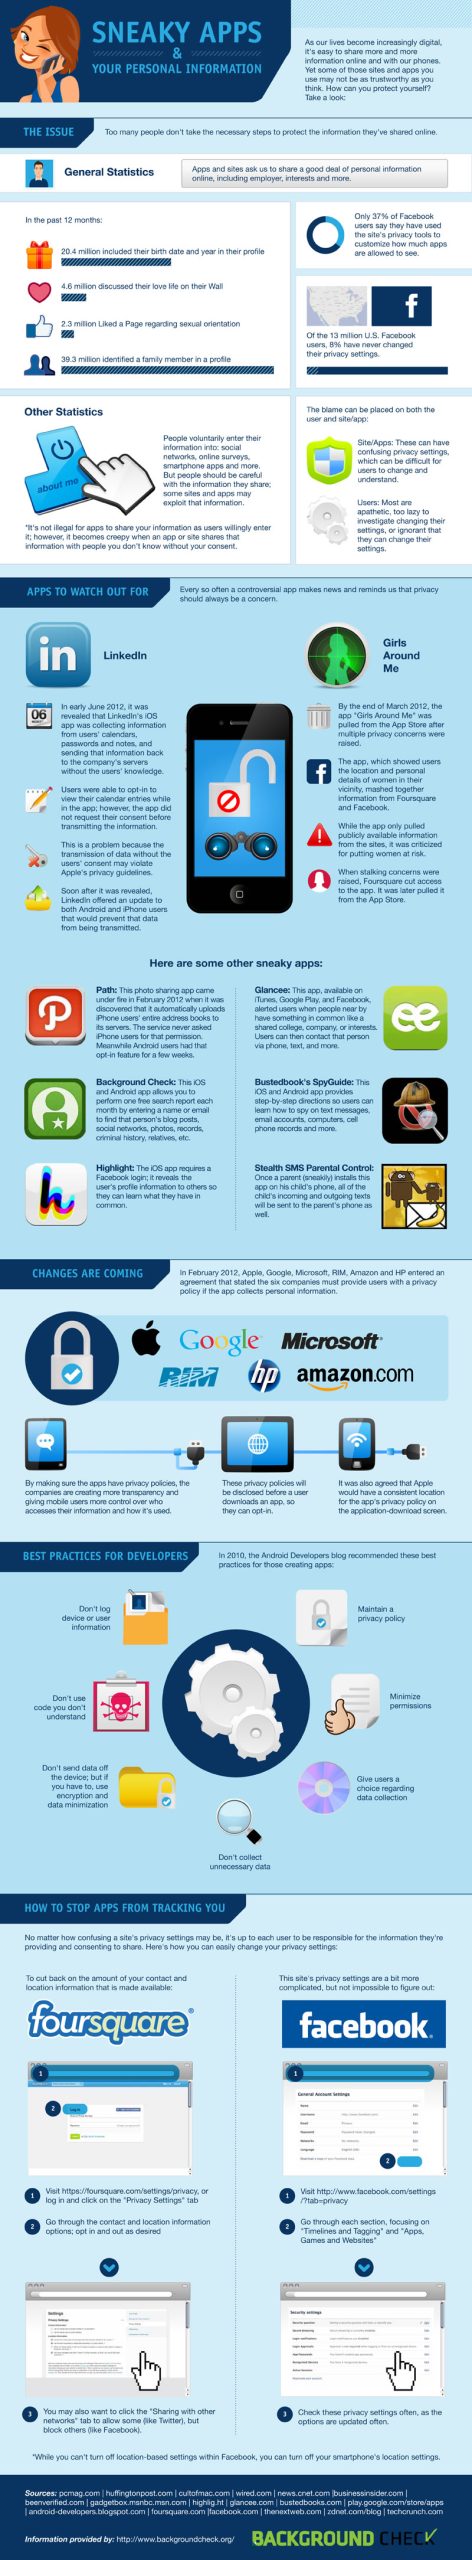 INFOGRAPHIC: Sneaky Apps and Your Personal Information